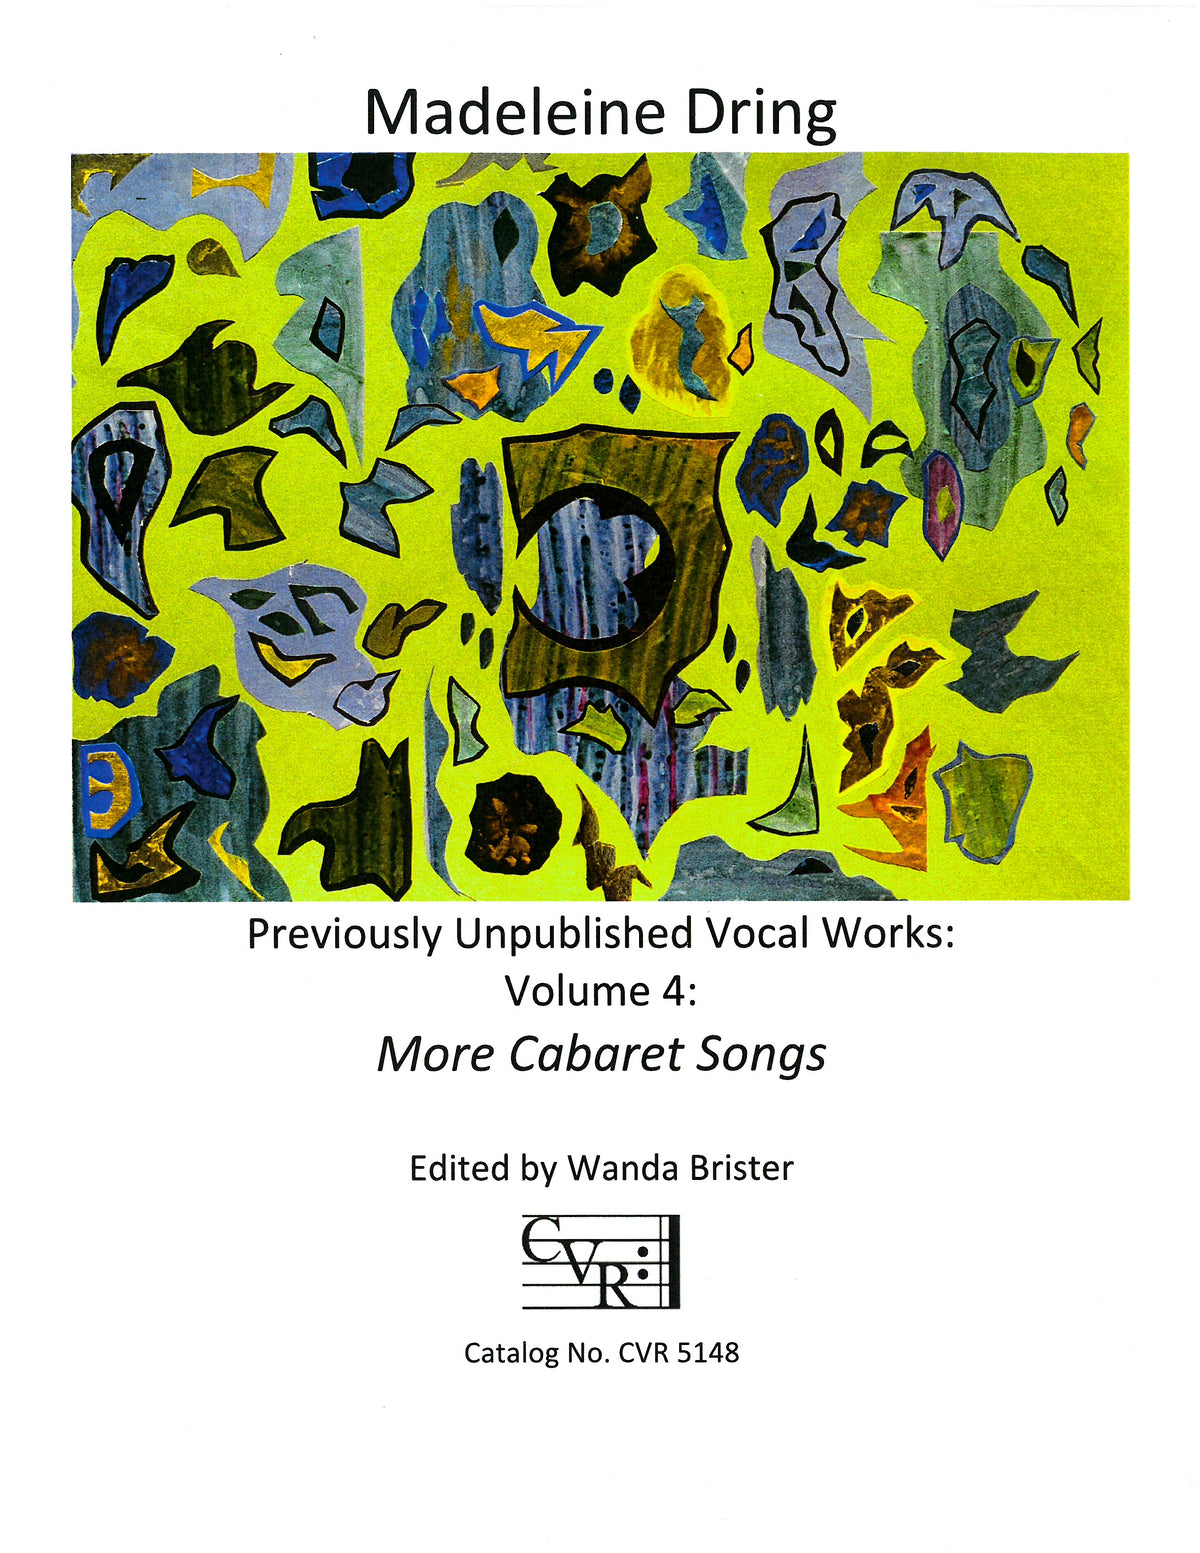 Dring More Cabaret Songs - Volume 4 - Previously Unpublished Vocal Works